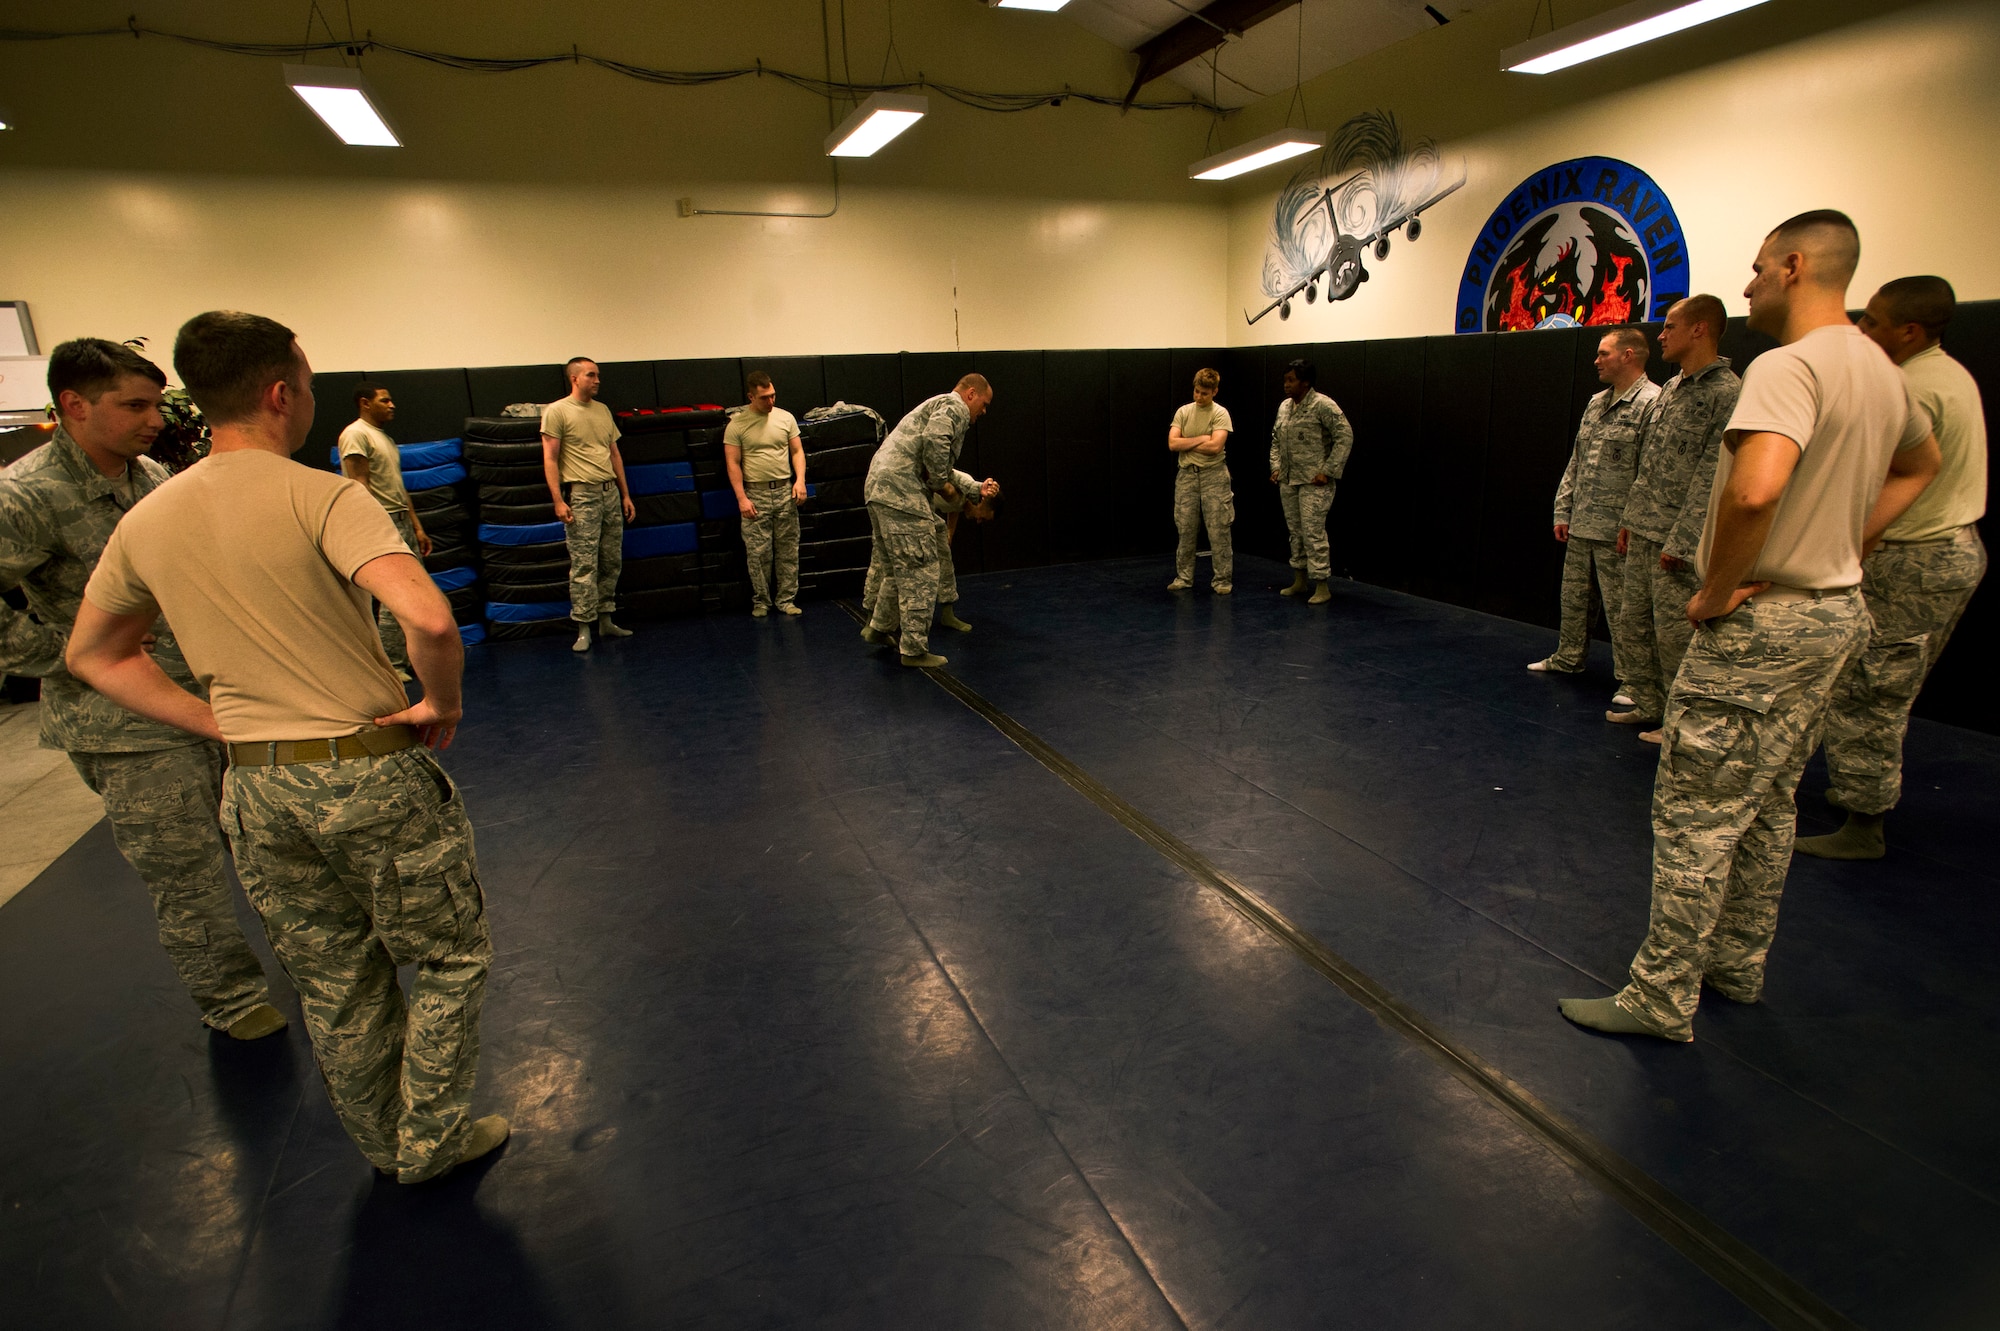 Airmen from the 628th Security Forces Squadron train together using Personal Apprehension Restraint Techniques and Mechanical Advantage Control Hold training at the combat arms building, at Joint Base Charleston - Air Base, S.C., June 5, 2012. The training is an annual requirement for the Airmen in case of a physical situation while on duty. (U.S. Air Force photo by Airman 1st Class George Goslin)